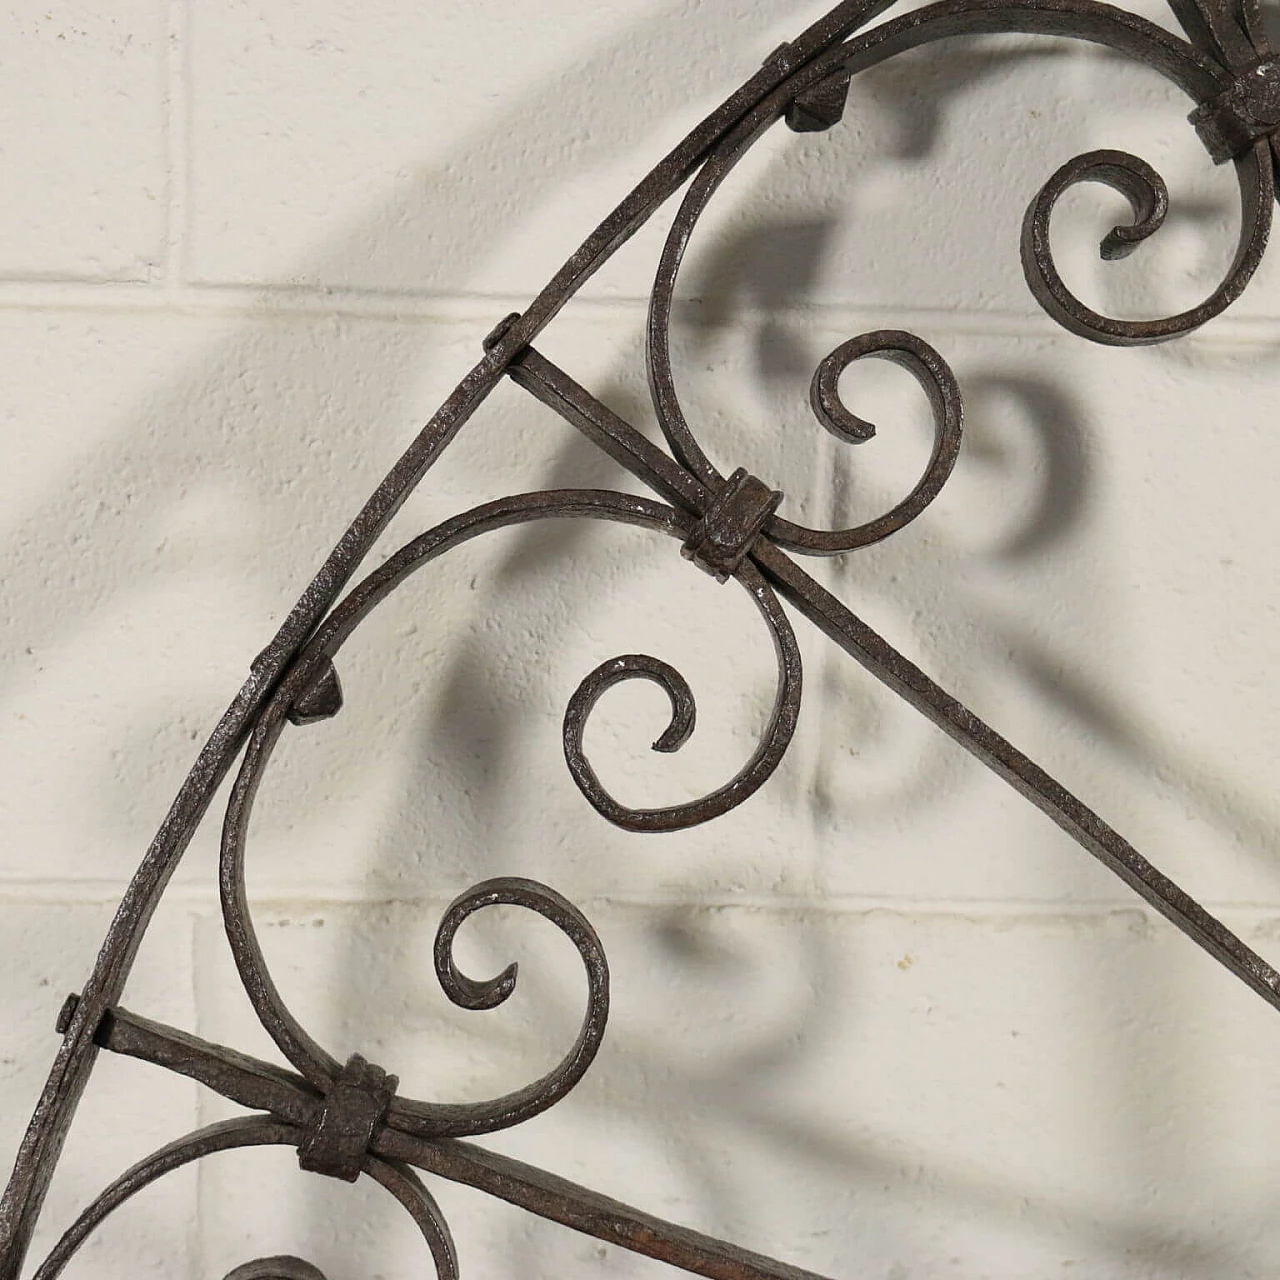 Wrought iron grating, early 17th century 4